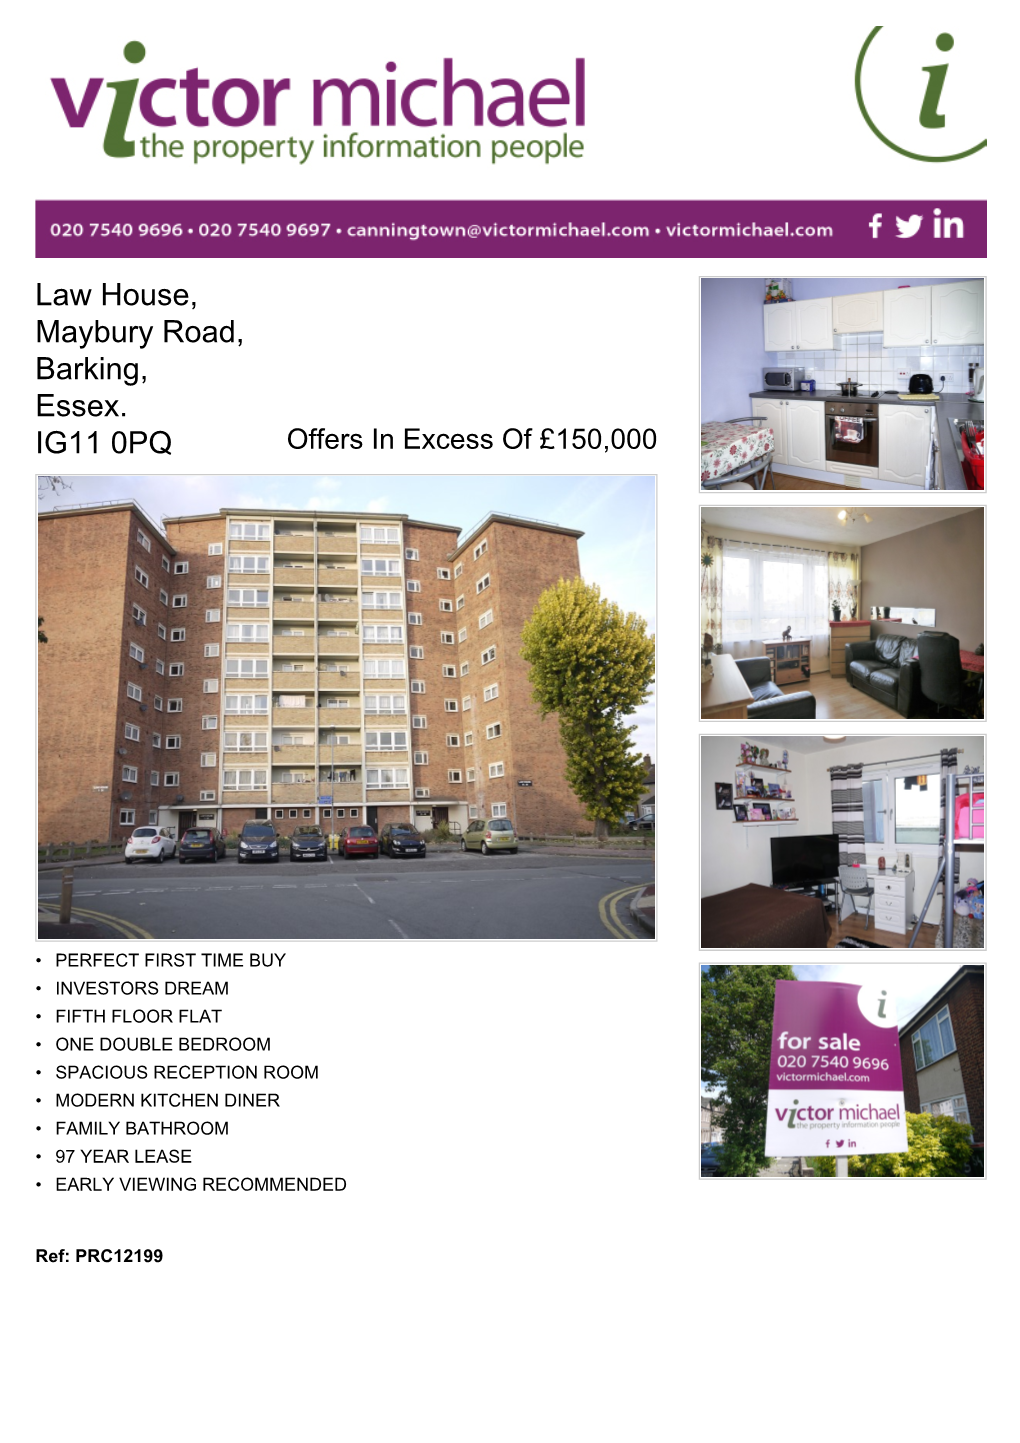 Law House, Maybury Road, Barking, Essex. IG11 0PQ Offers in Excess of £150,000